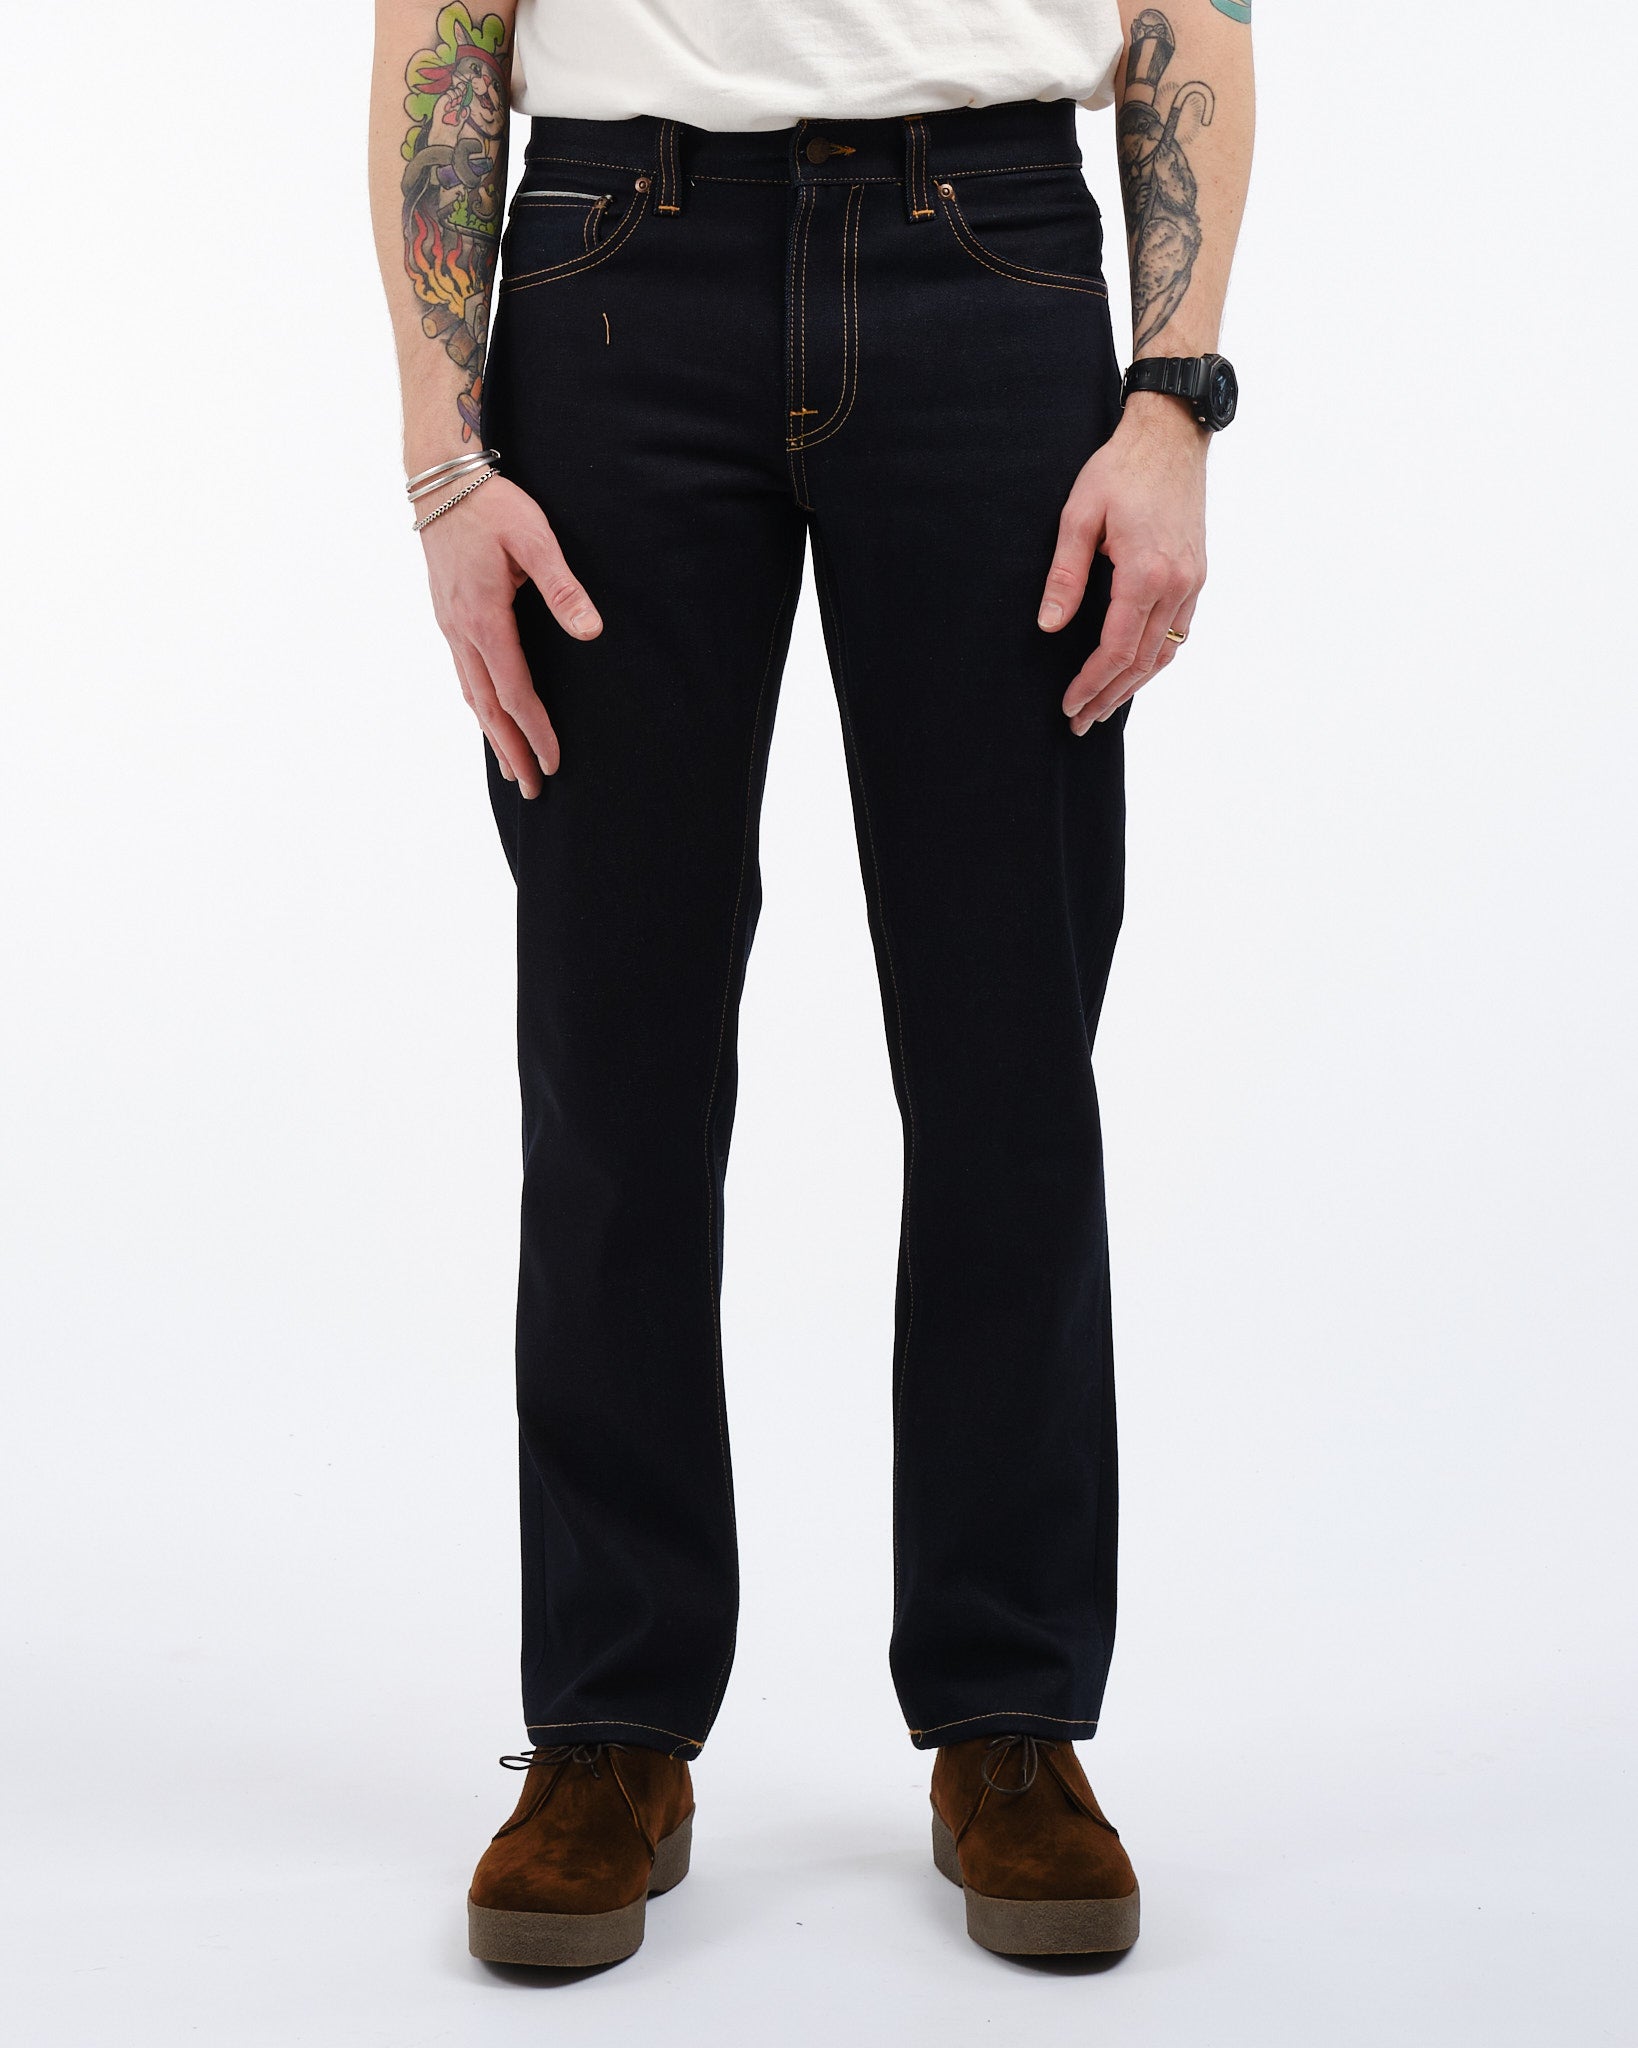 Nudie Jeans Gritty | Gritty Jackson Dry Maze Selvage | Meadow